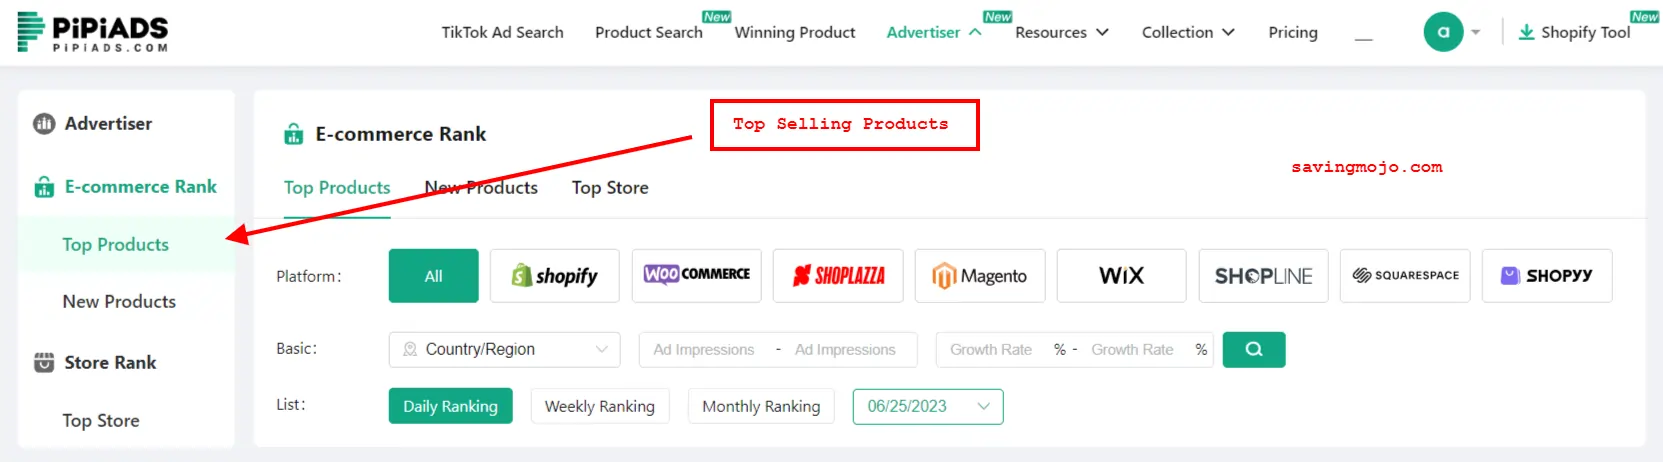 Top-selling Products